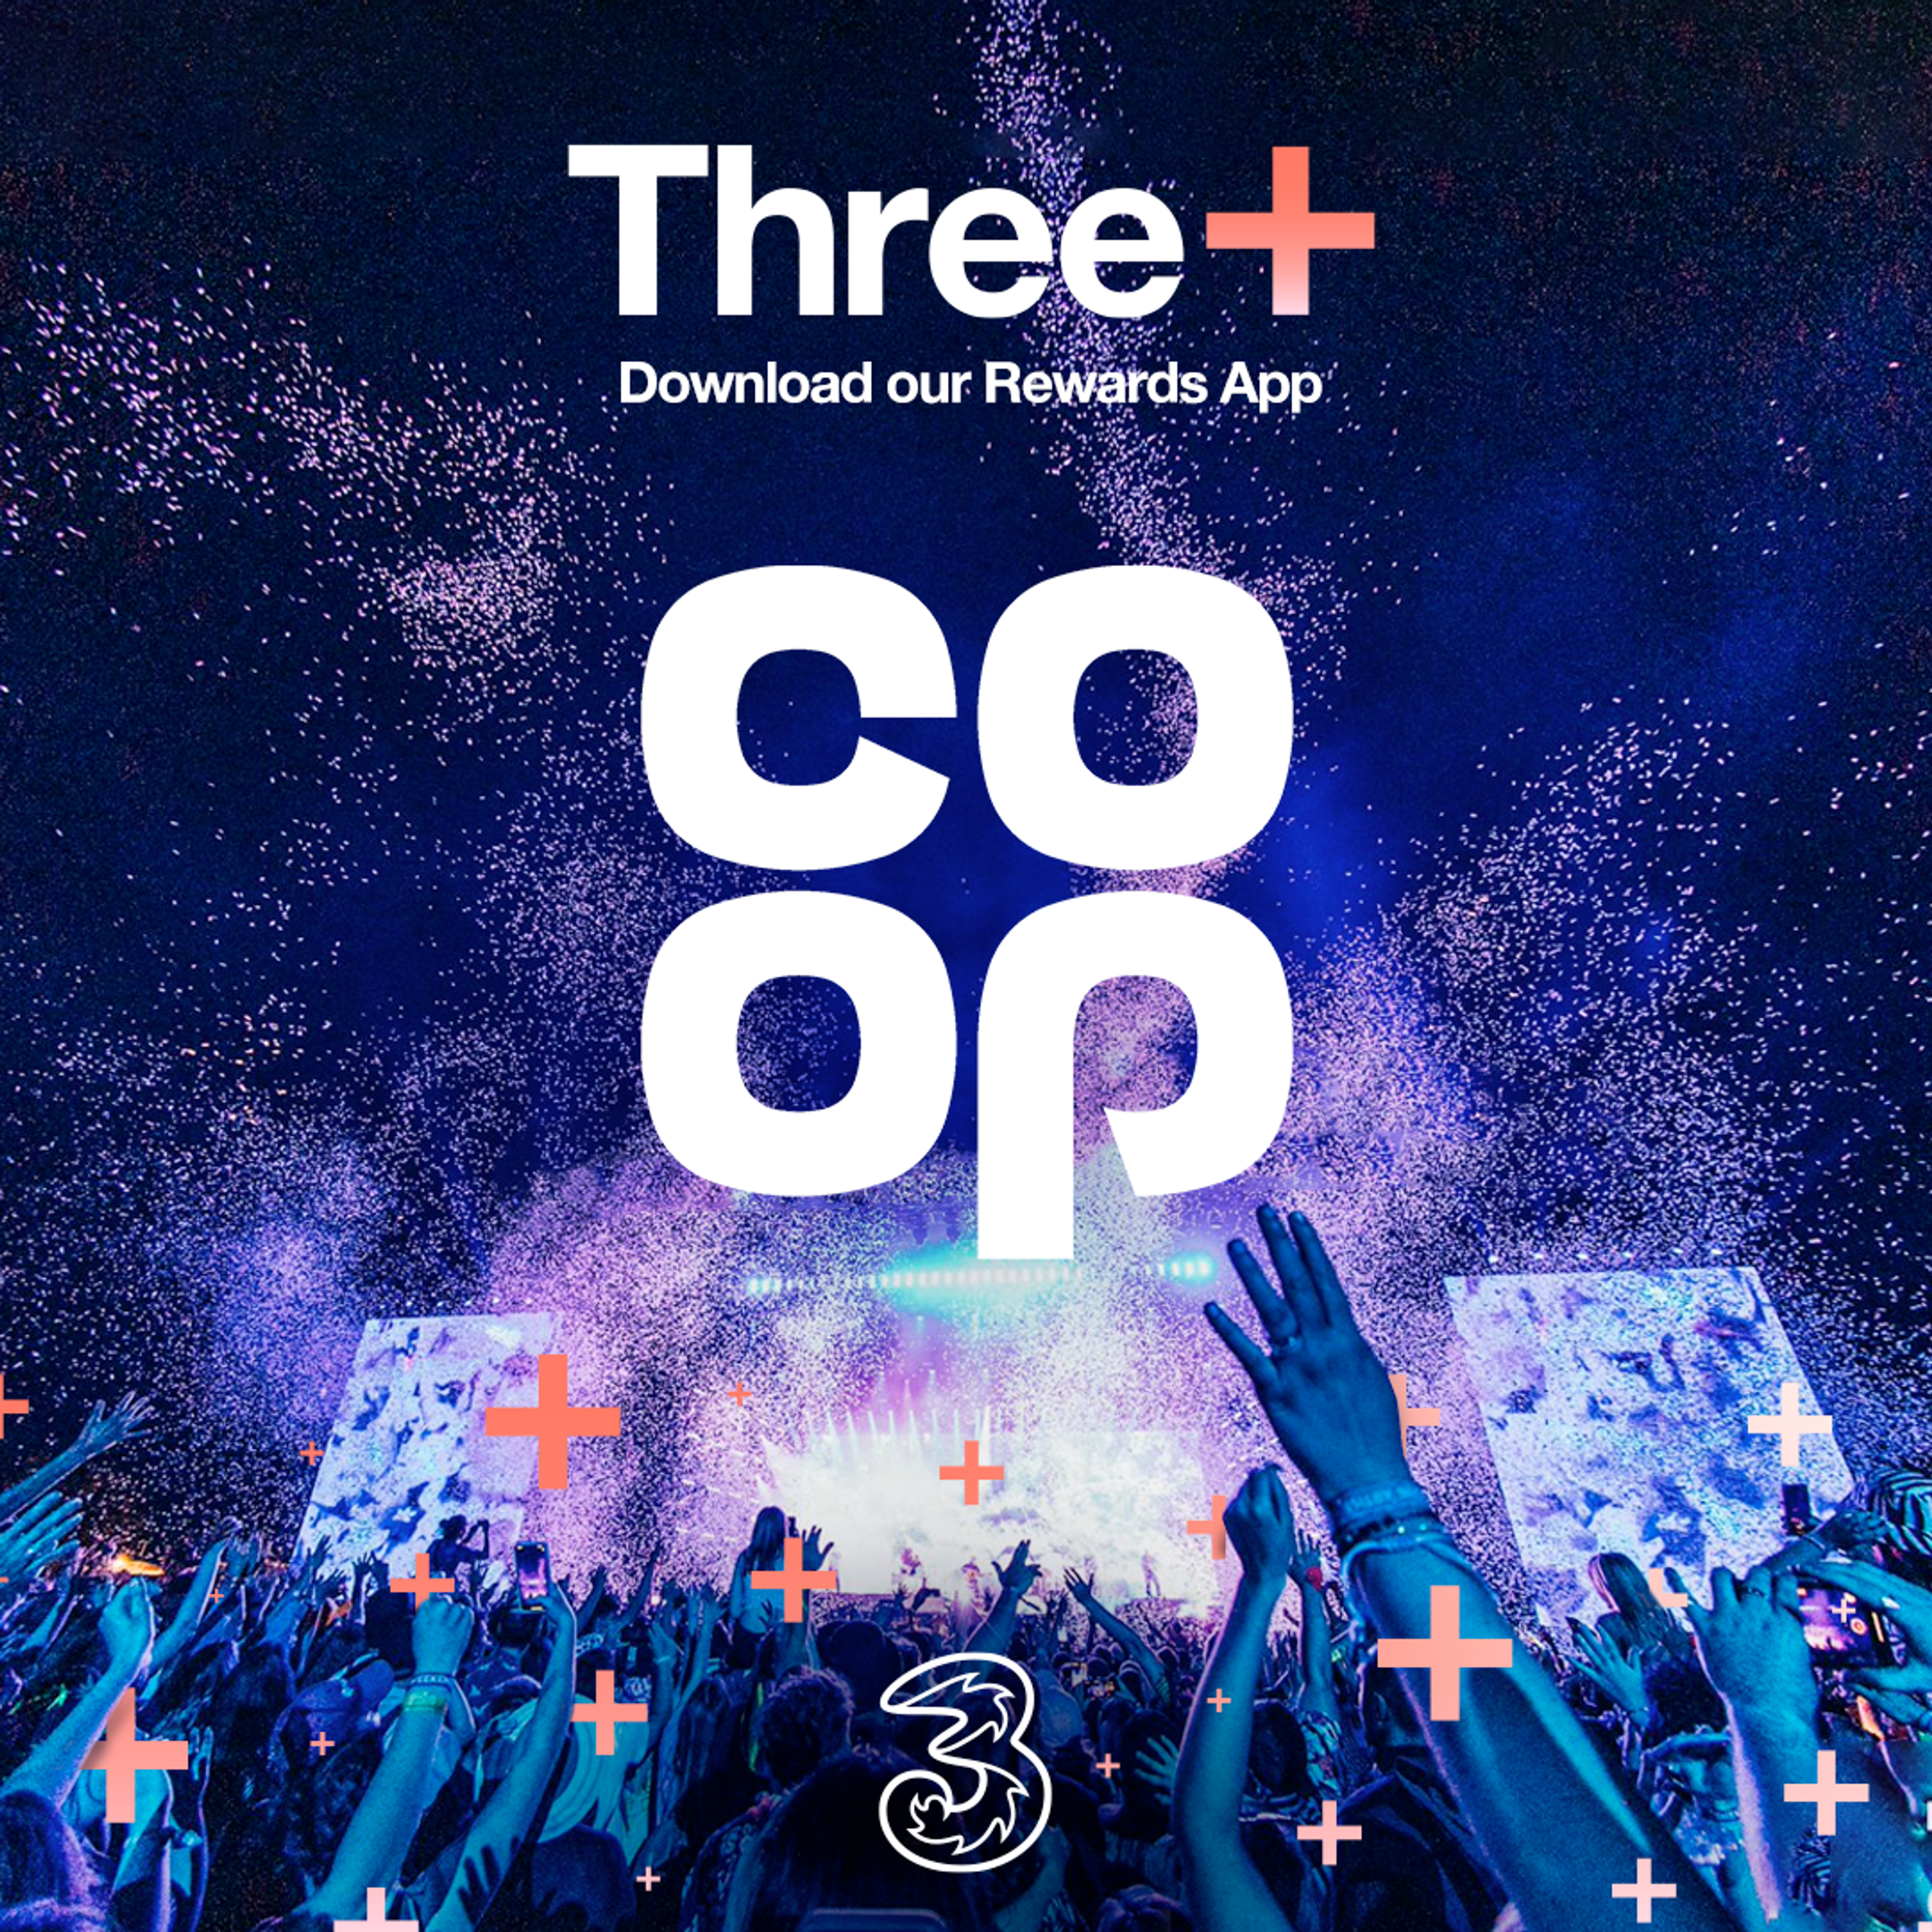 Festival stage at night behind the Three+ and Co-Op logos